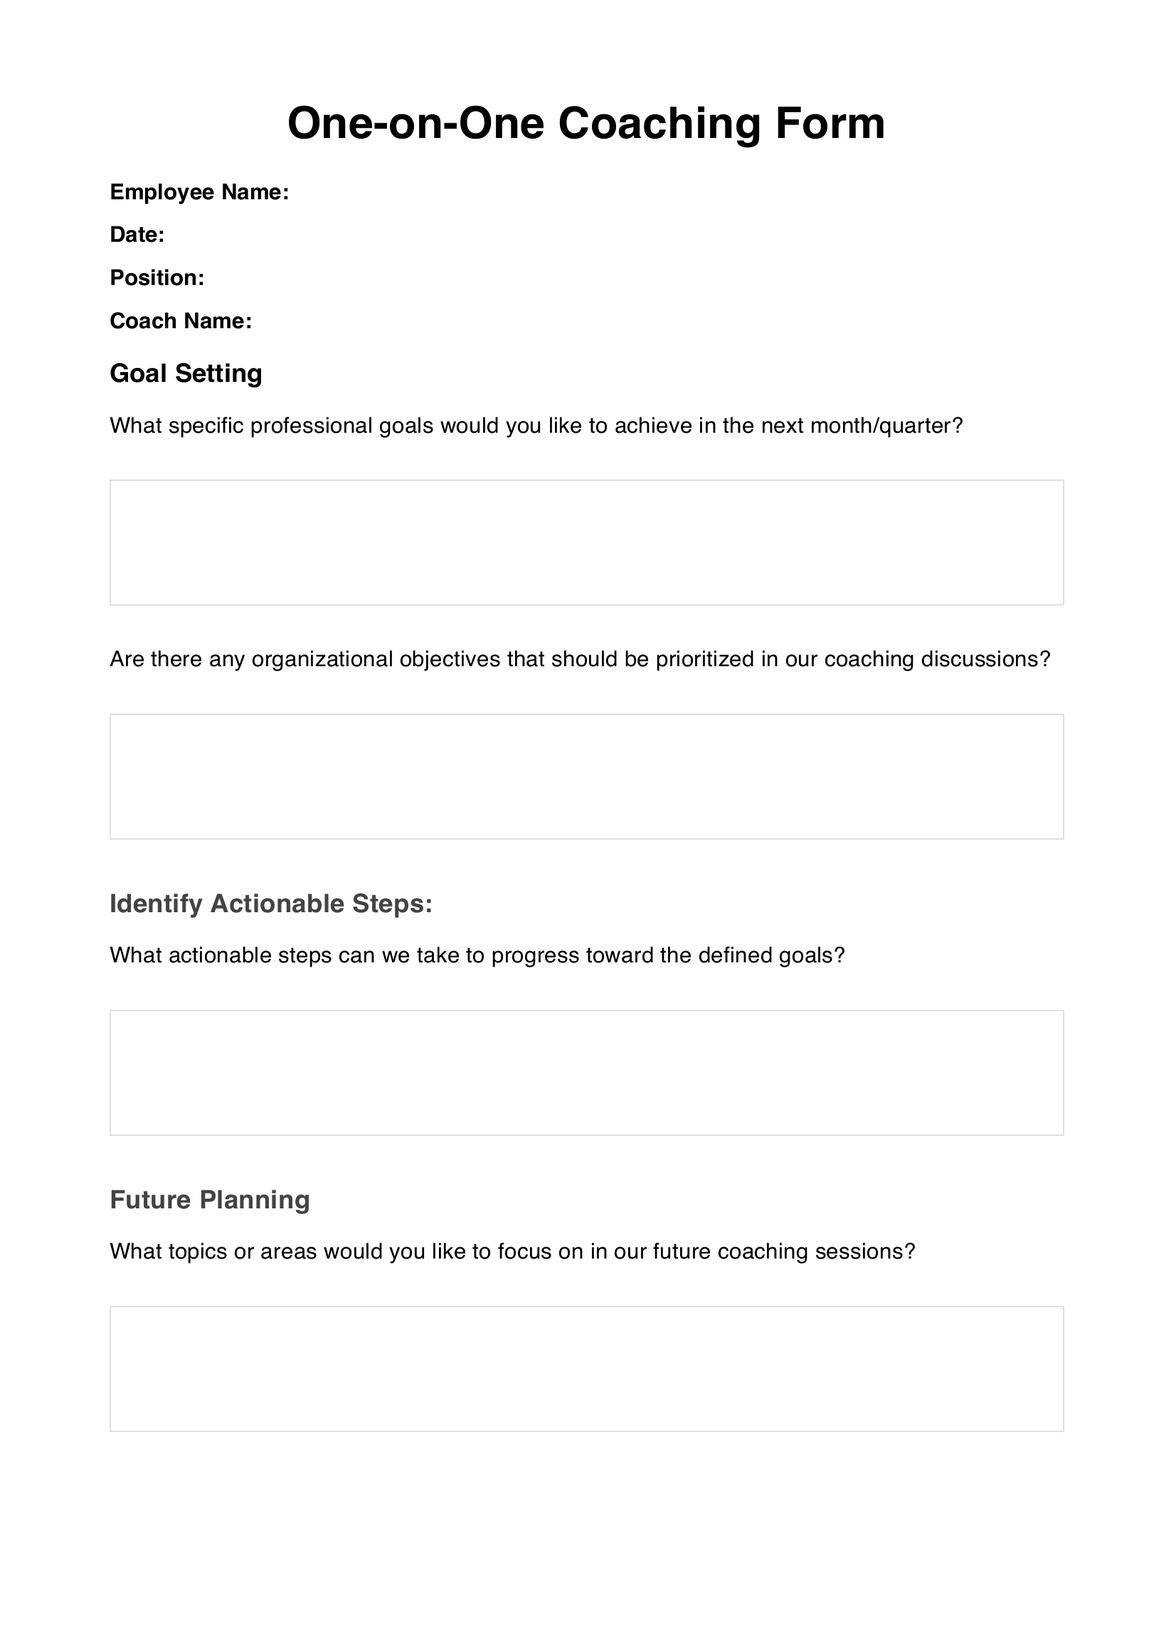 One On One Coaching Form PDF Example